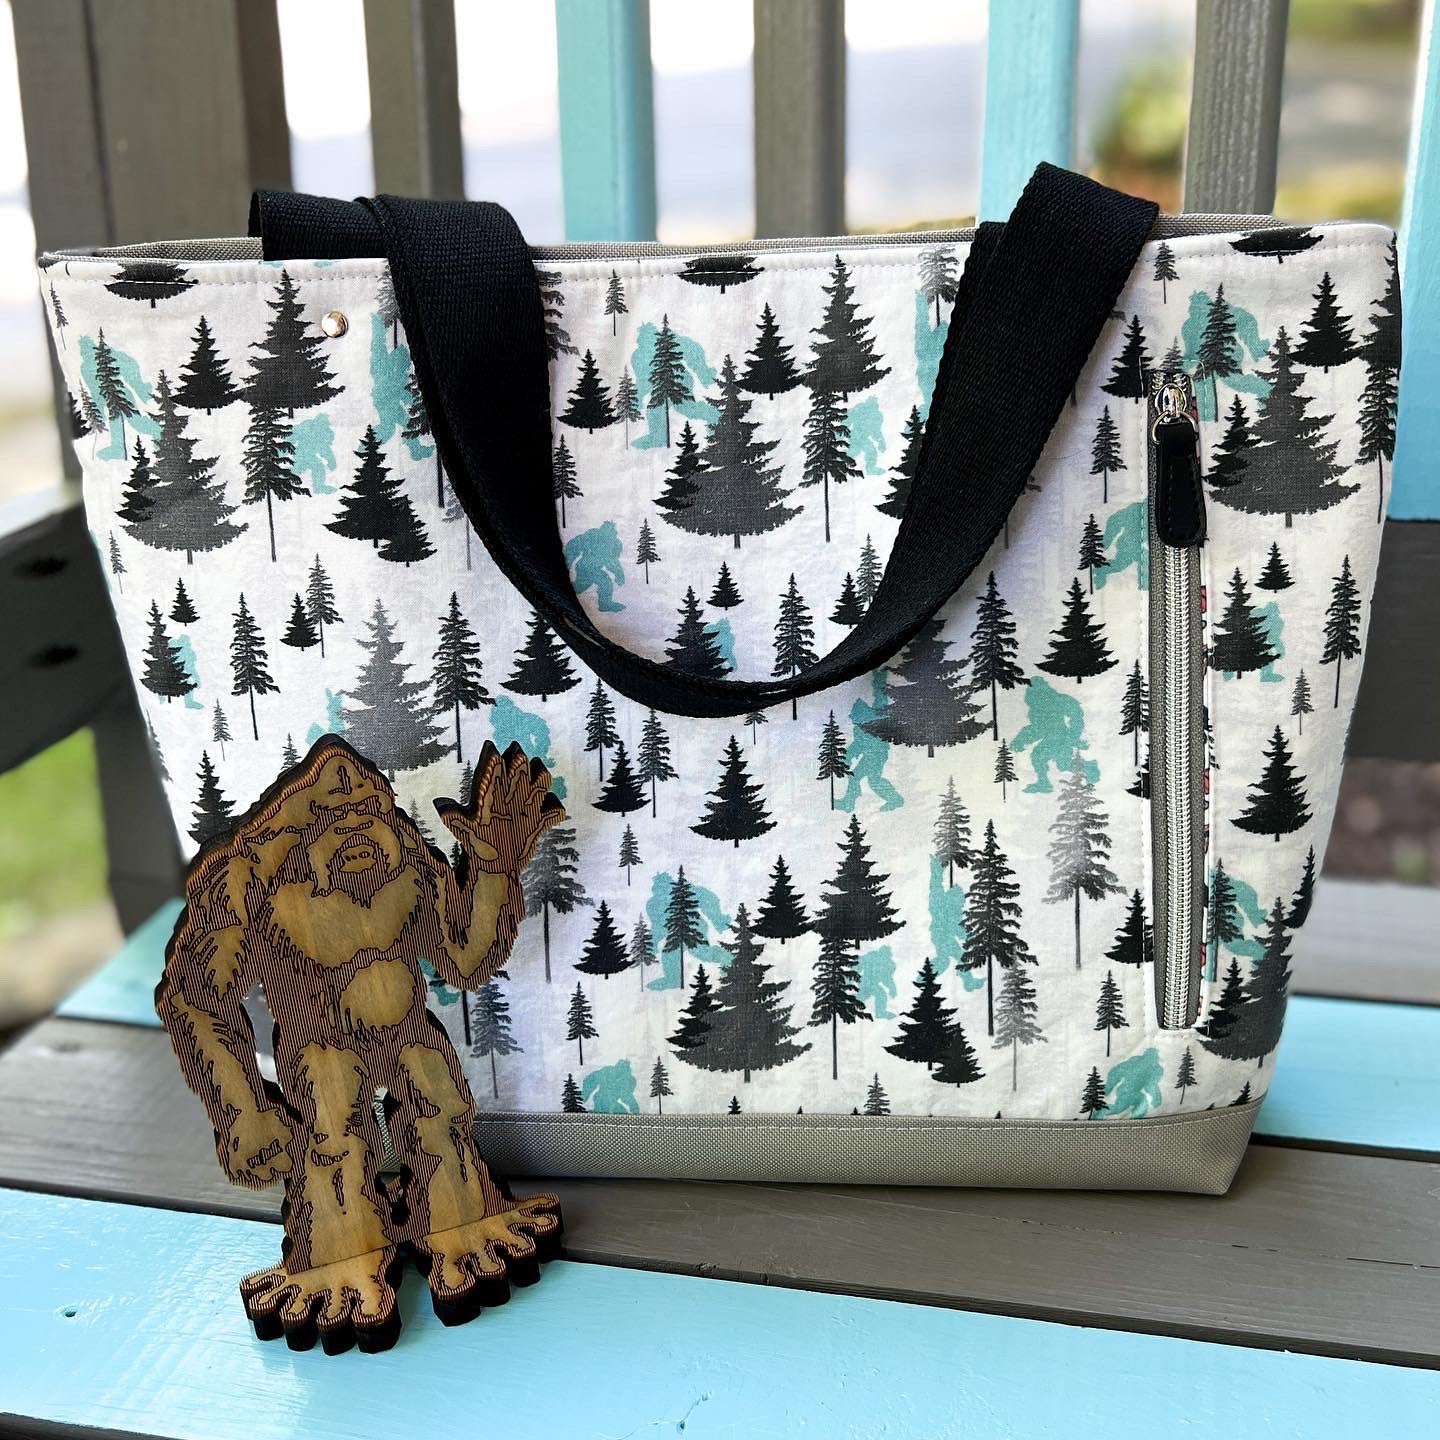 2 Sizes Utility Tote Bag PDF Sewing Pattern and Tutorial Instant